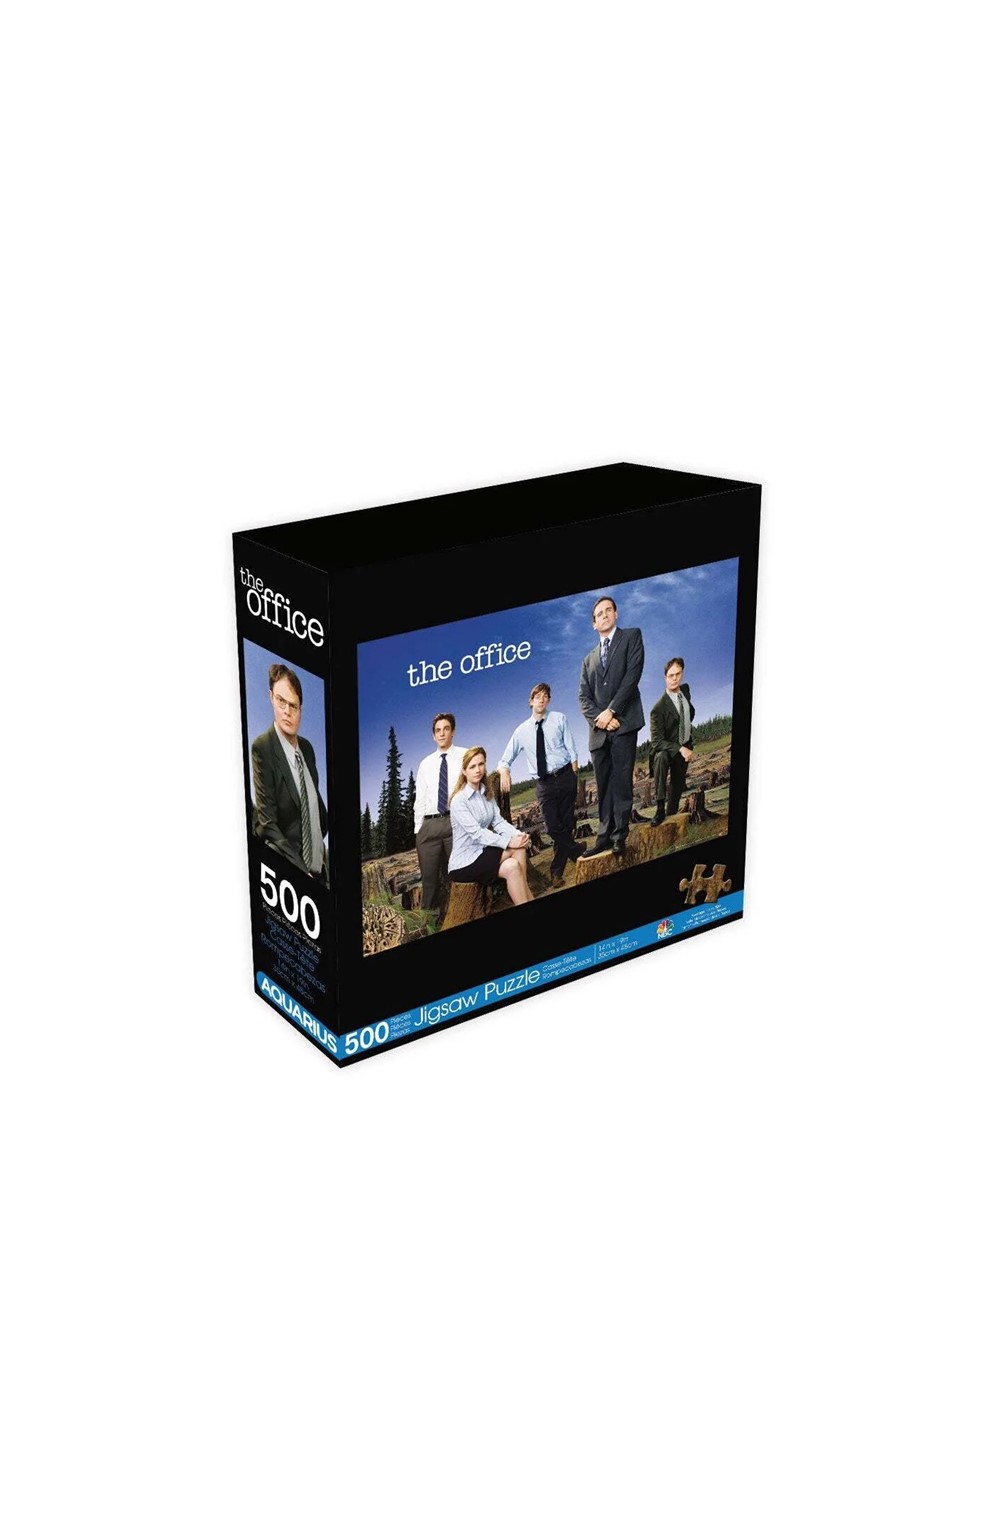 The Office 500 Piece Jigsaw Puzzle	